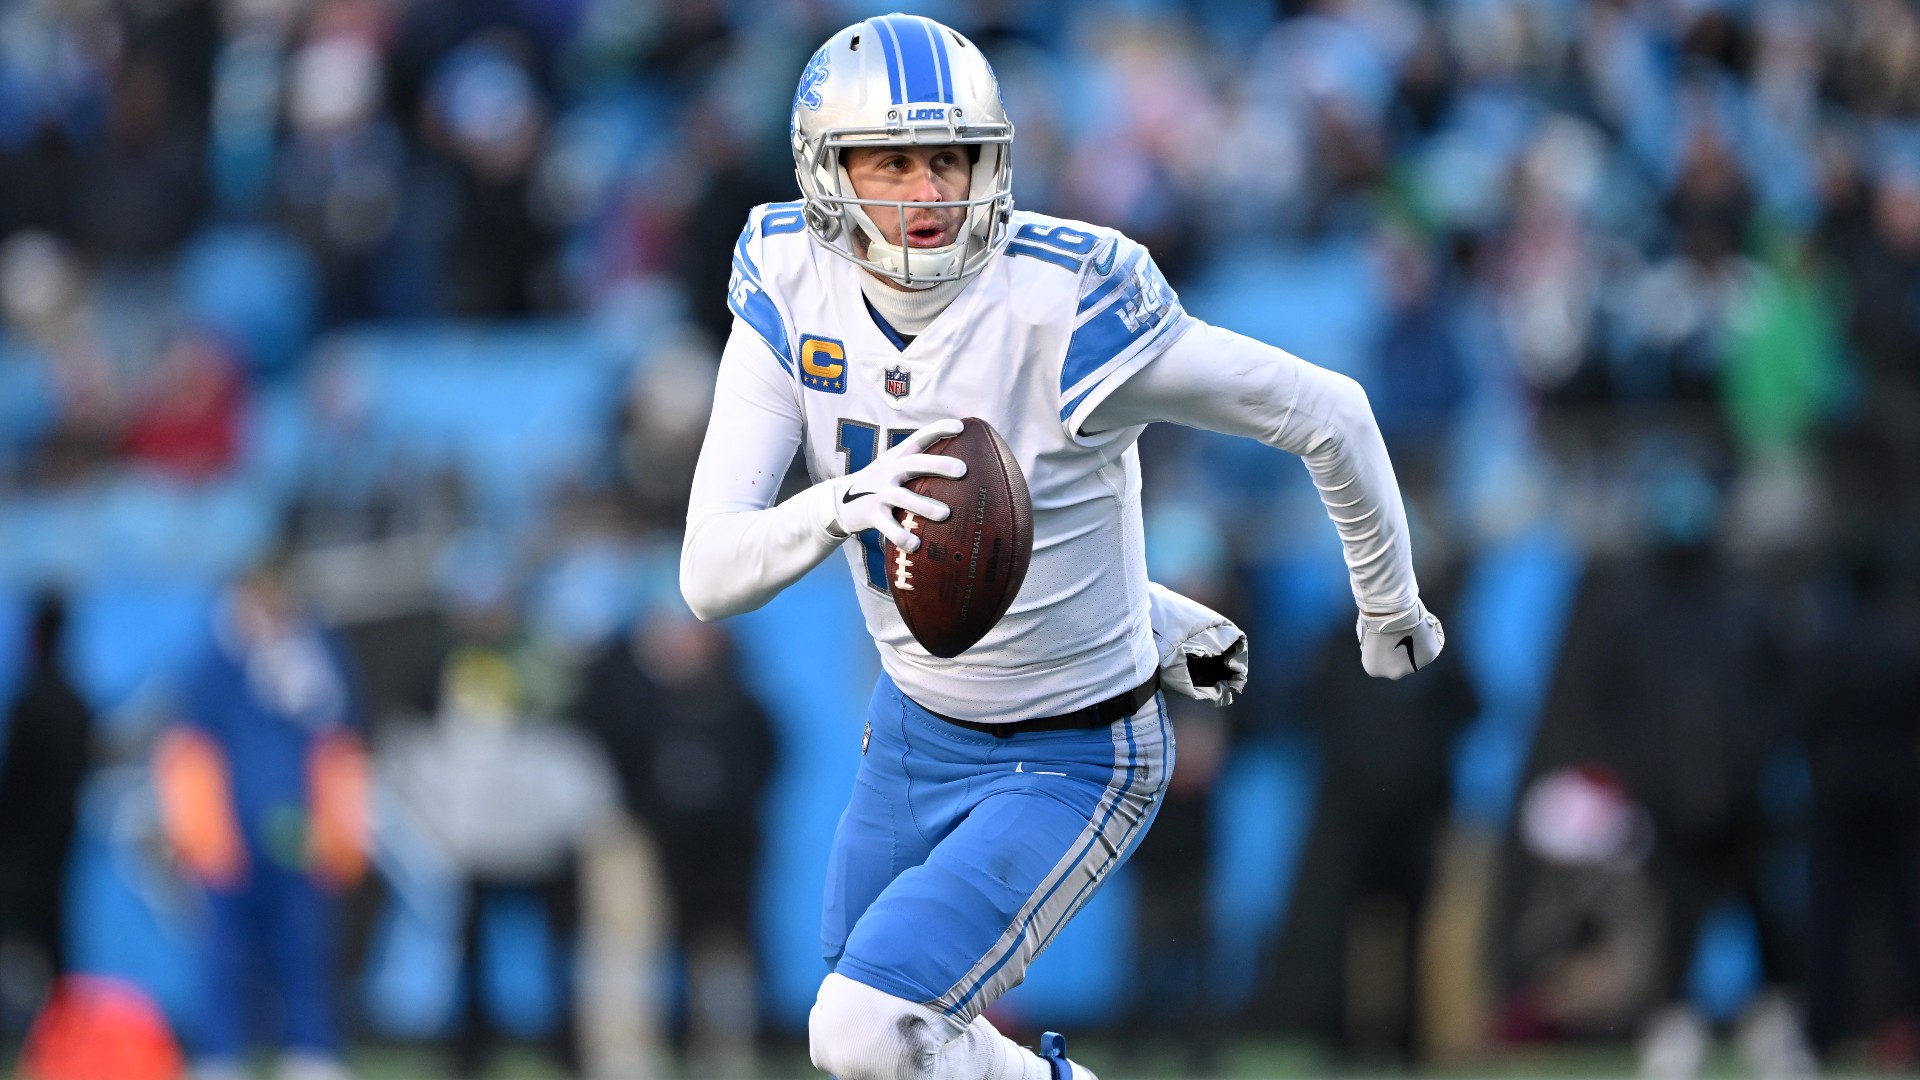  Jared Goff Turns the Tide How the Unexpected Star is Reviving Detroit Lions' Football Dreams-